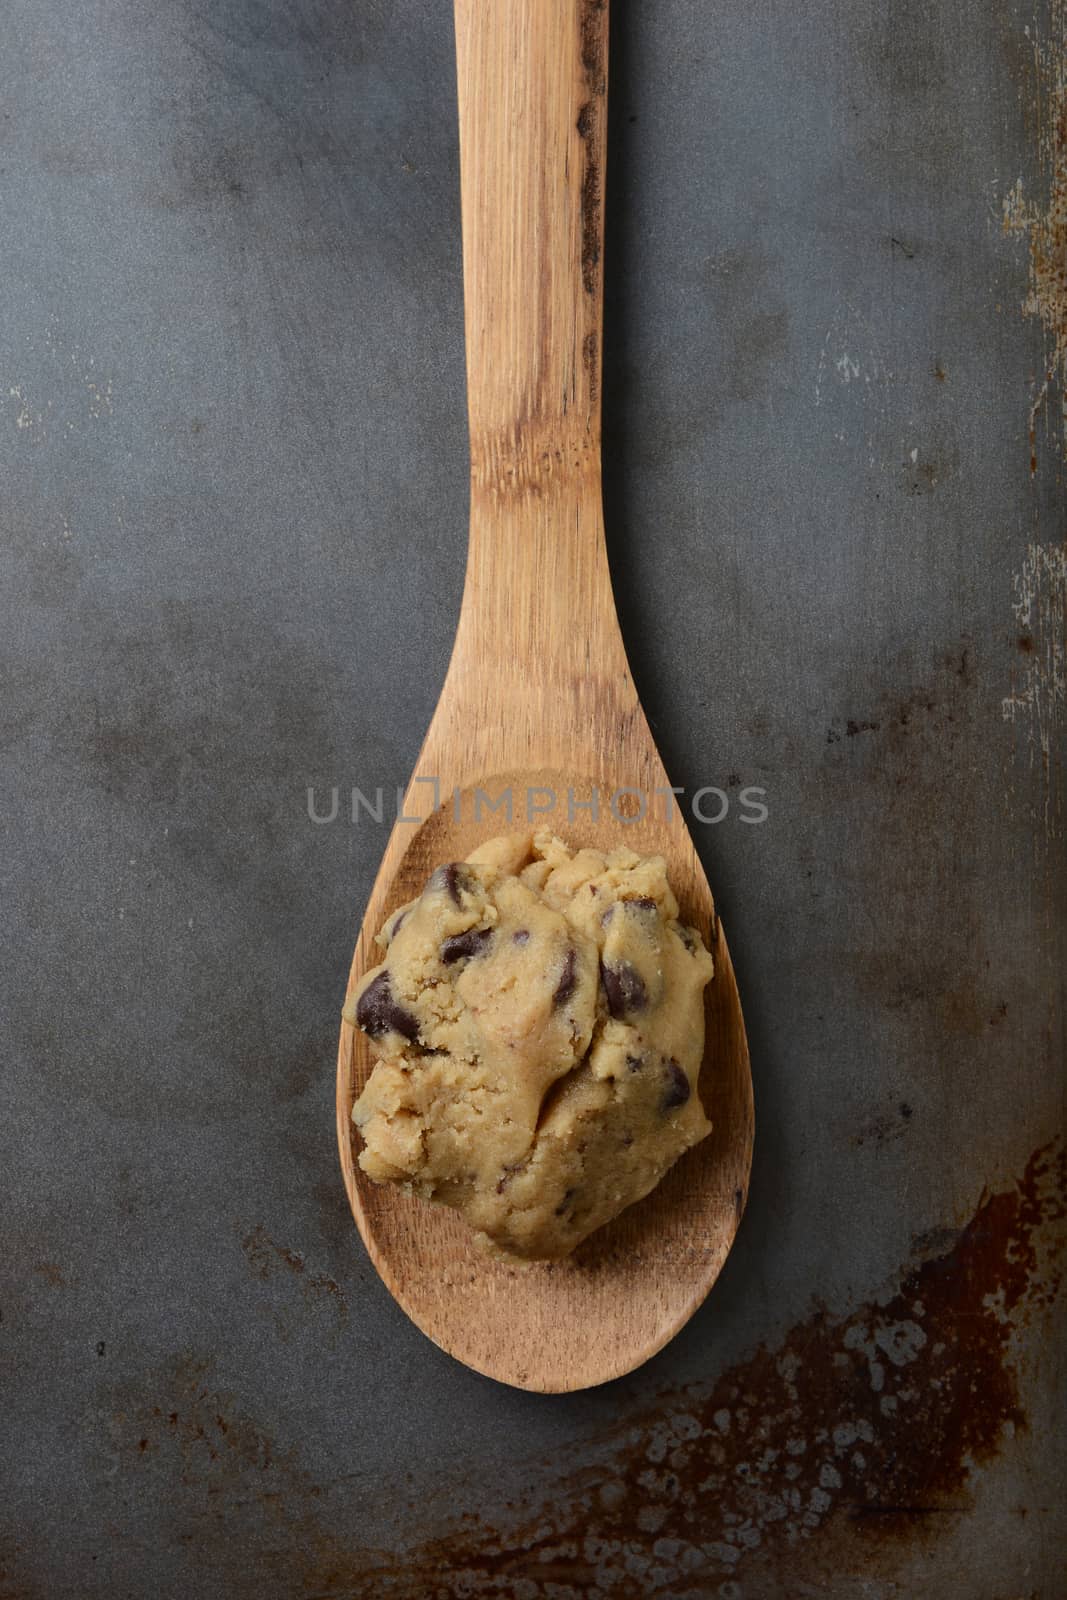 Cookie Dough on Wooden Spoon by sCukrov